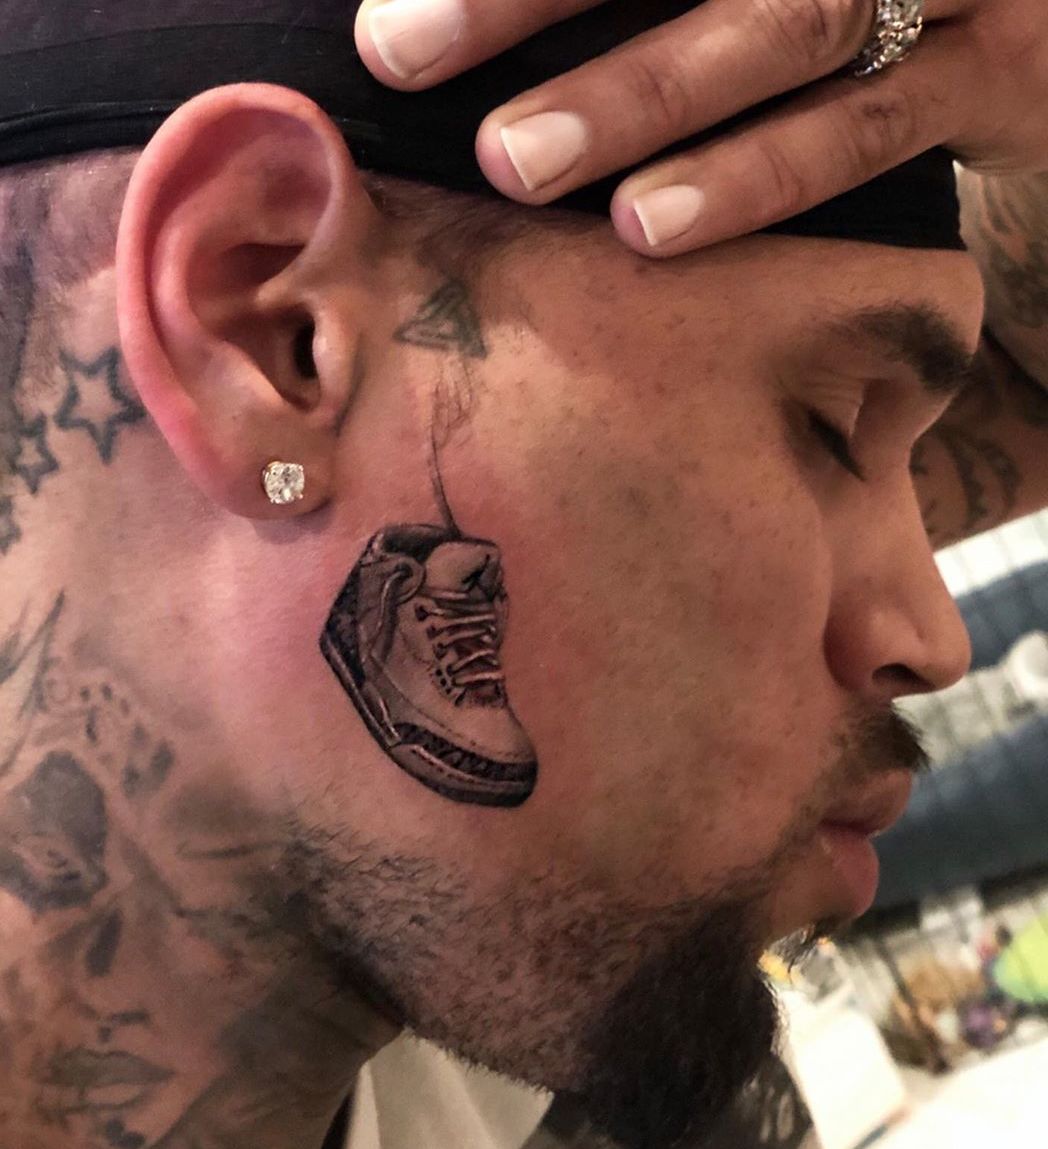 Portable trends as he gets new face tattoo in Cyprus (photos/video)